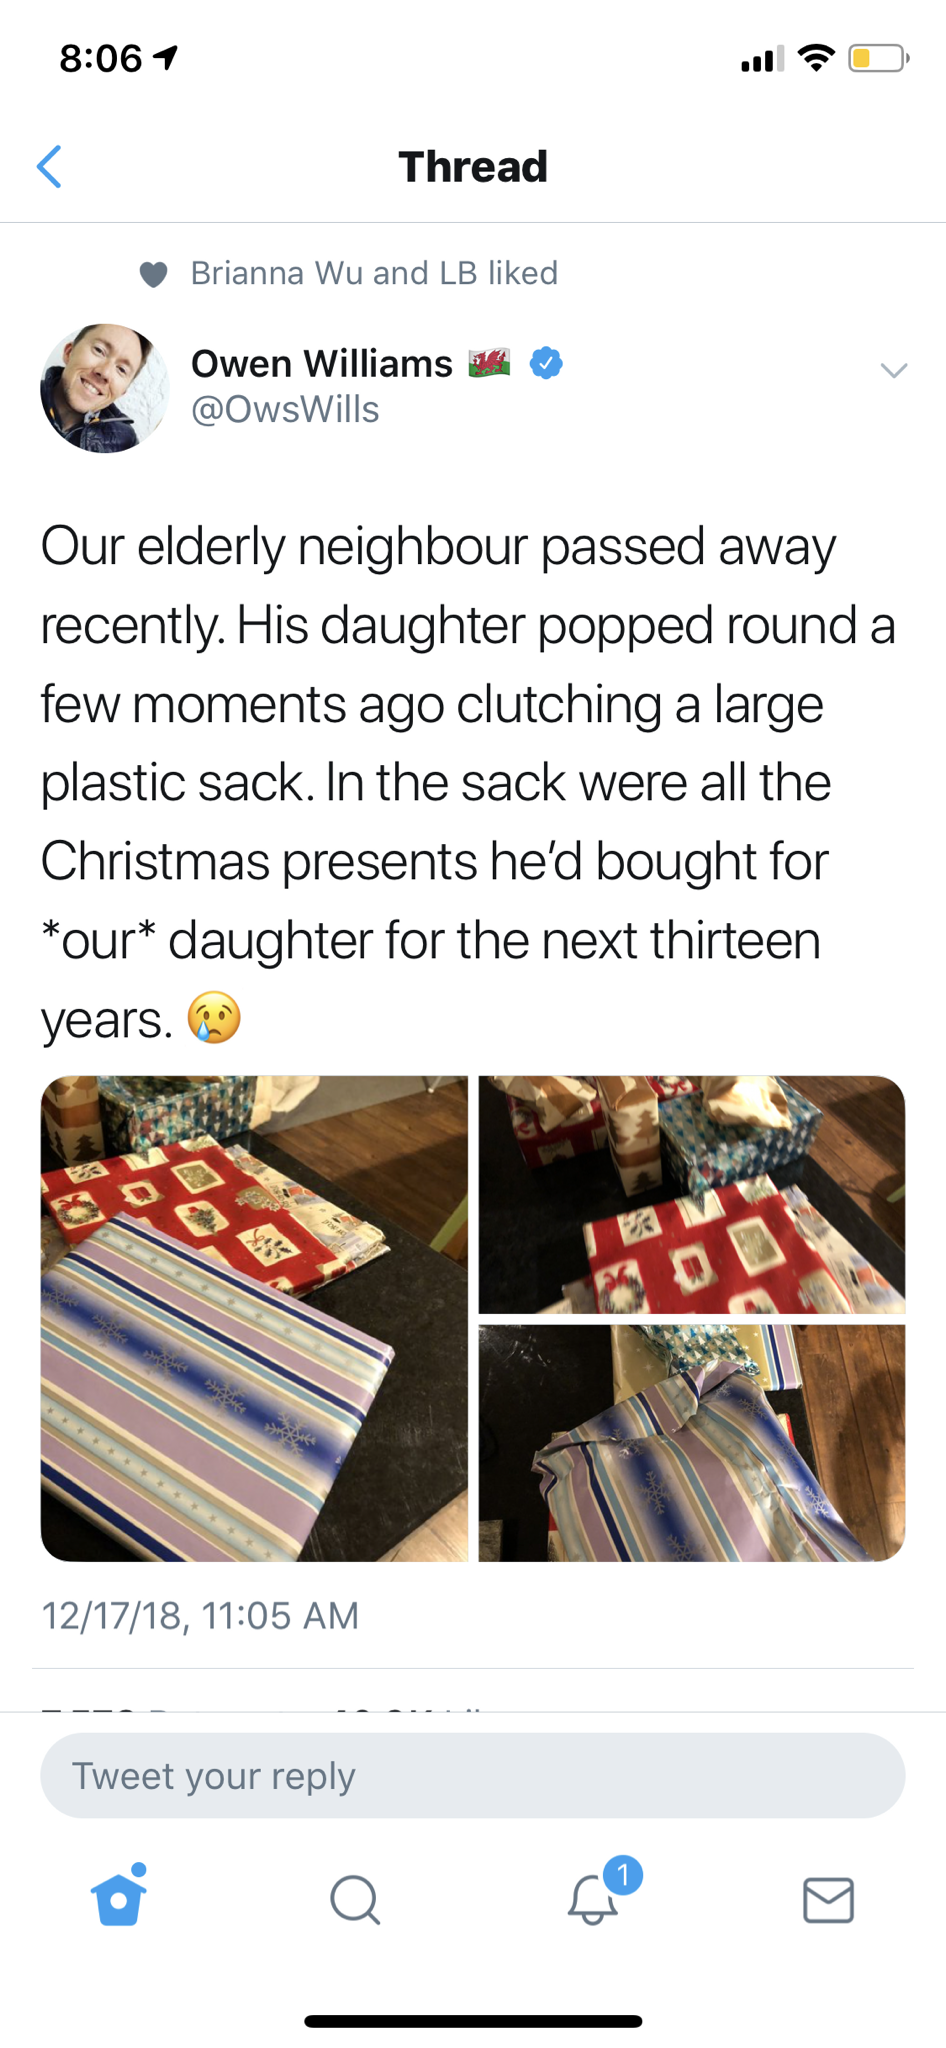 Man Died, but Not Before Leaving 14 Years Worth of Presents